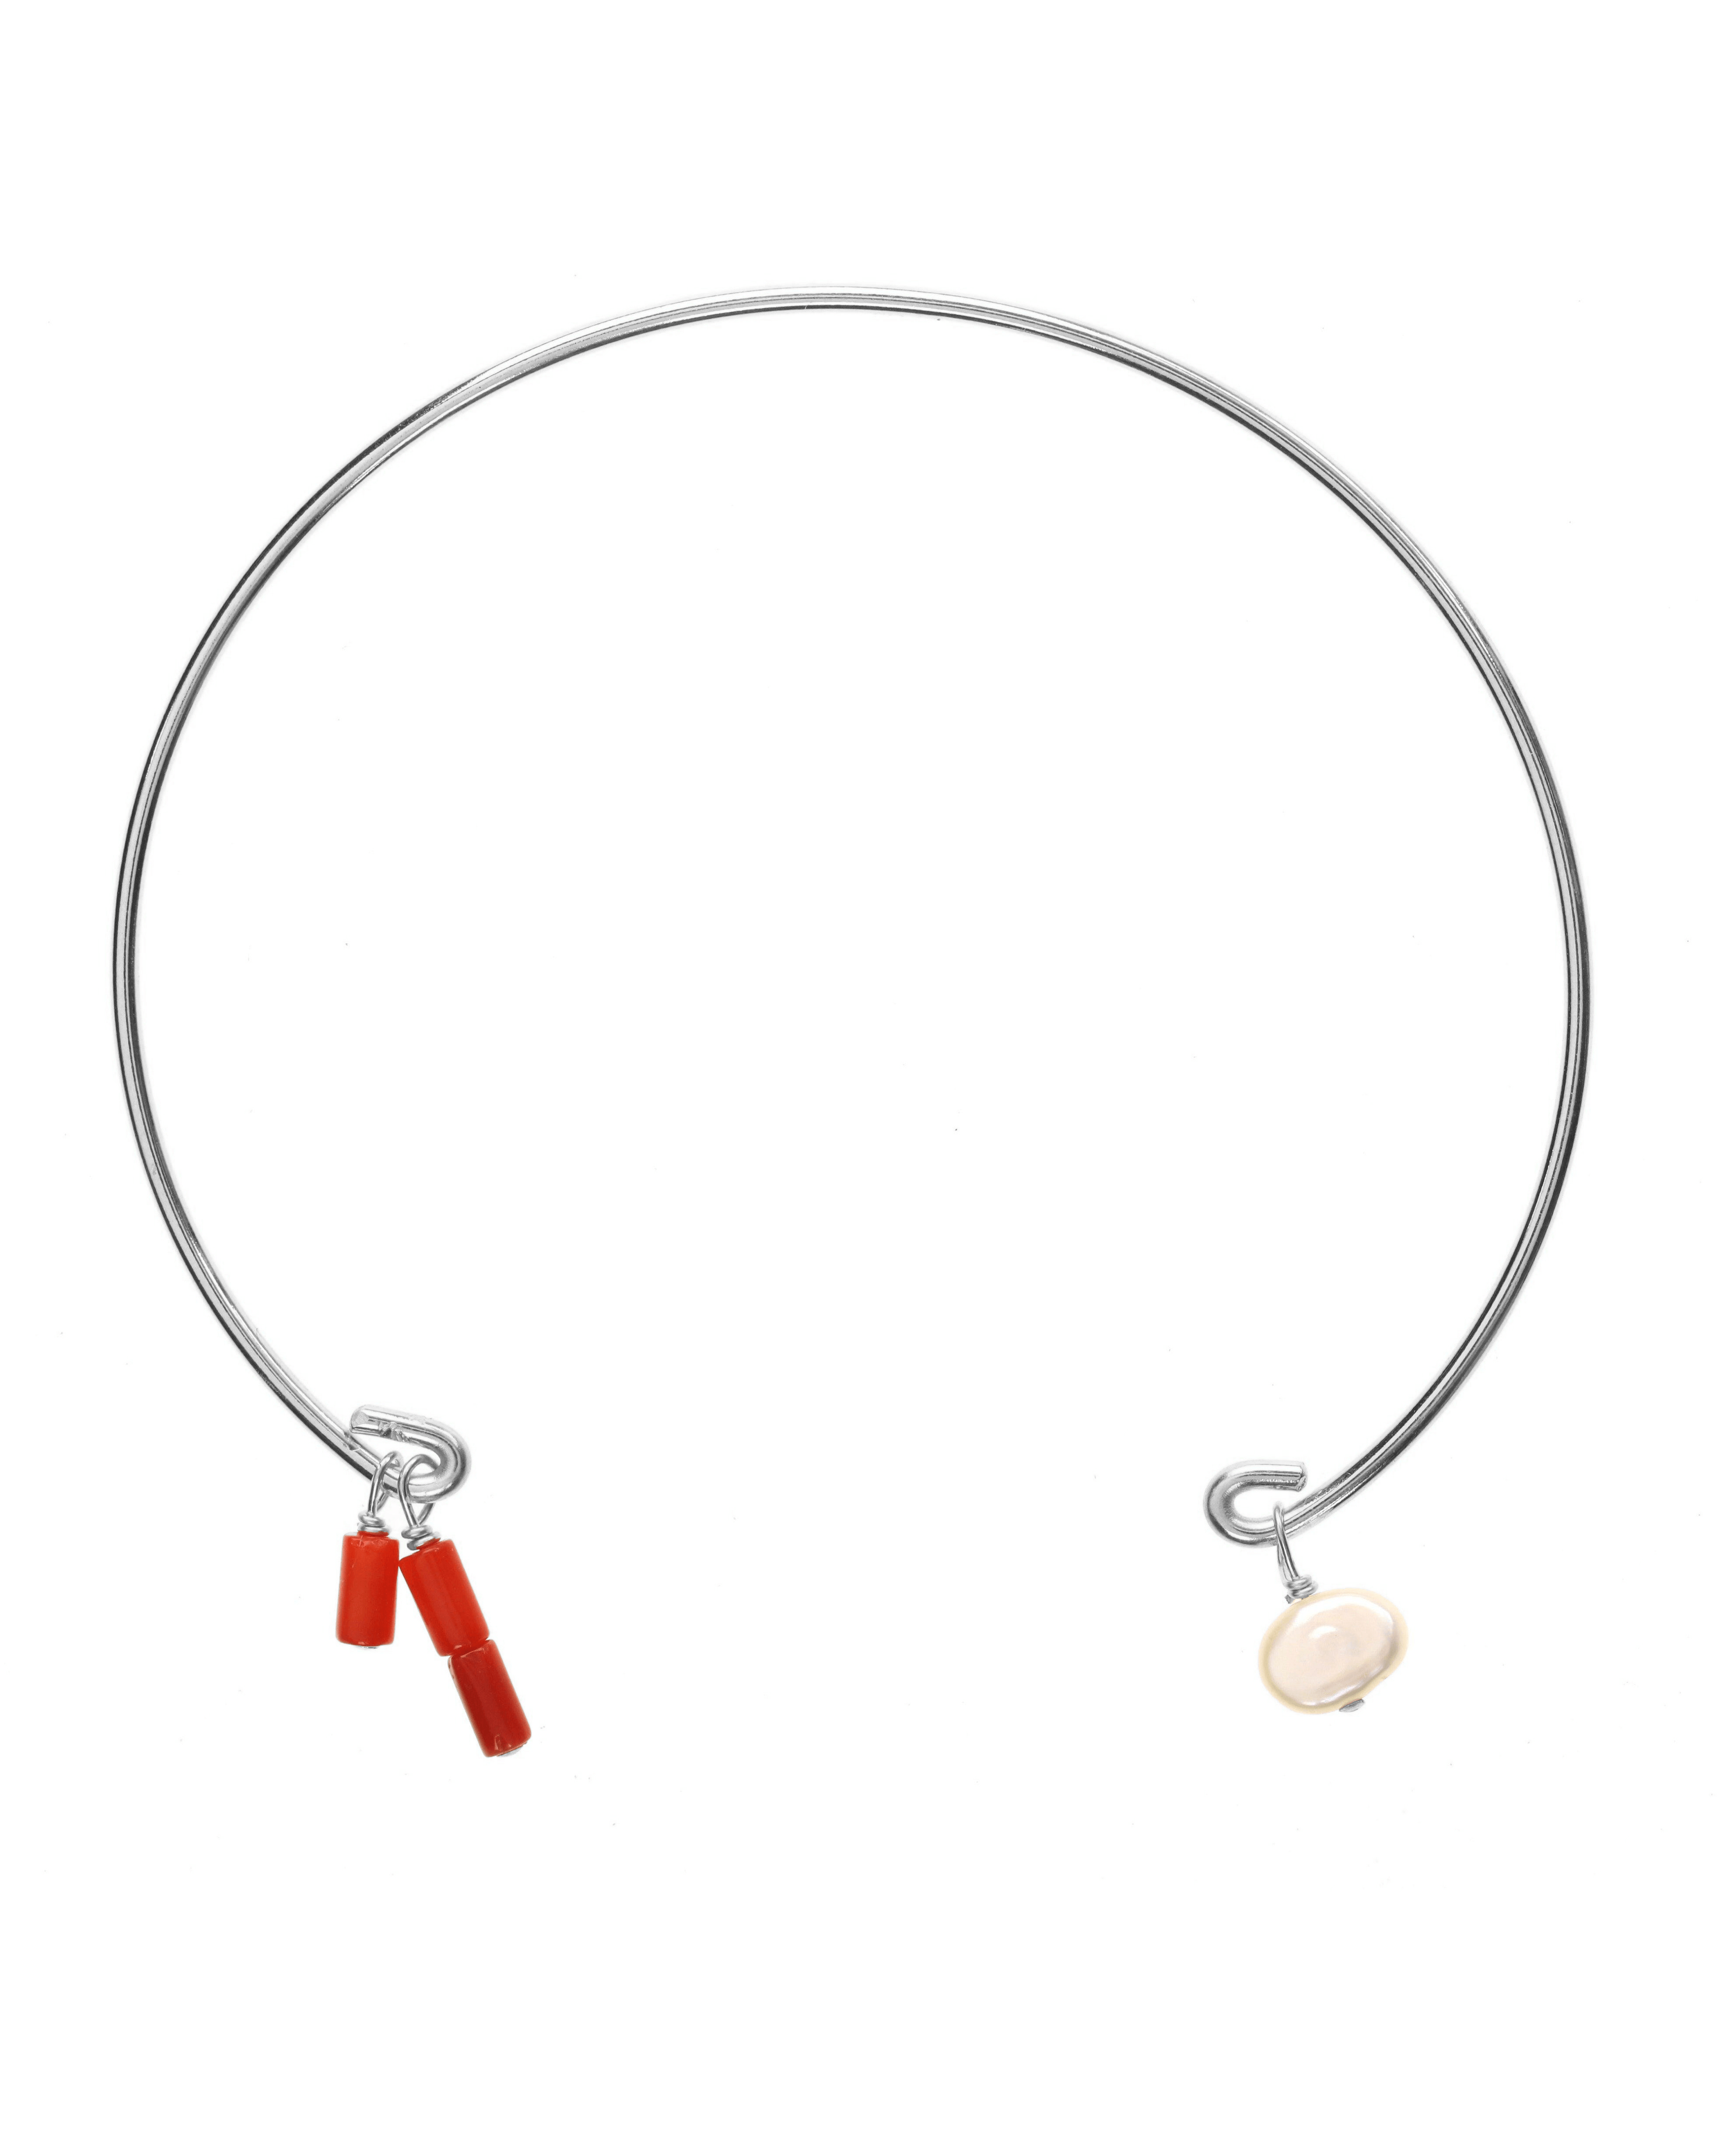 Rella Bracelet by KOZAKH. A bangle bracelet that fits a wrist of 6 to 8 inches, crafted in Sterling Silver, featuring dyed red coral tubes and a white irregular Pearl.